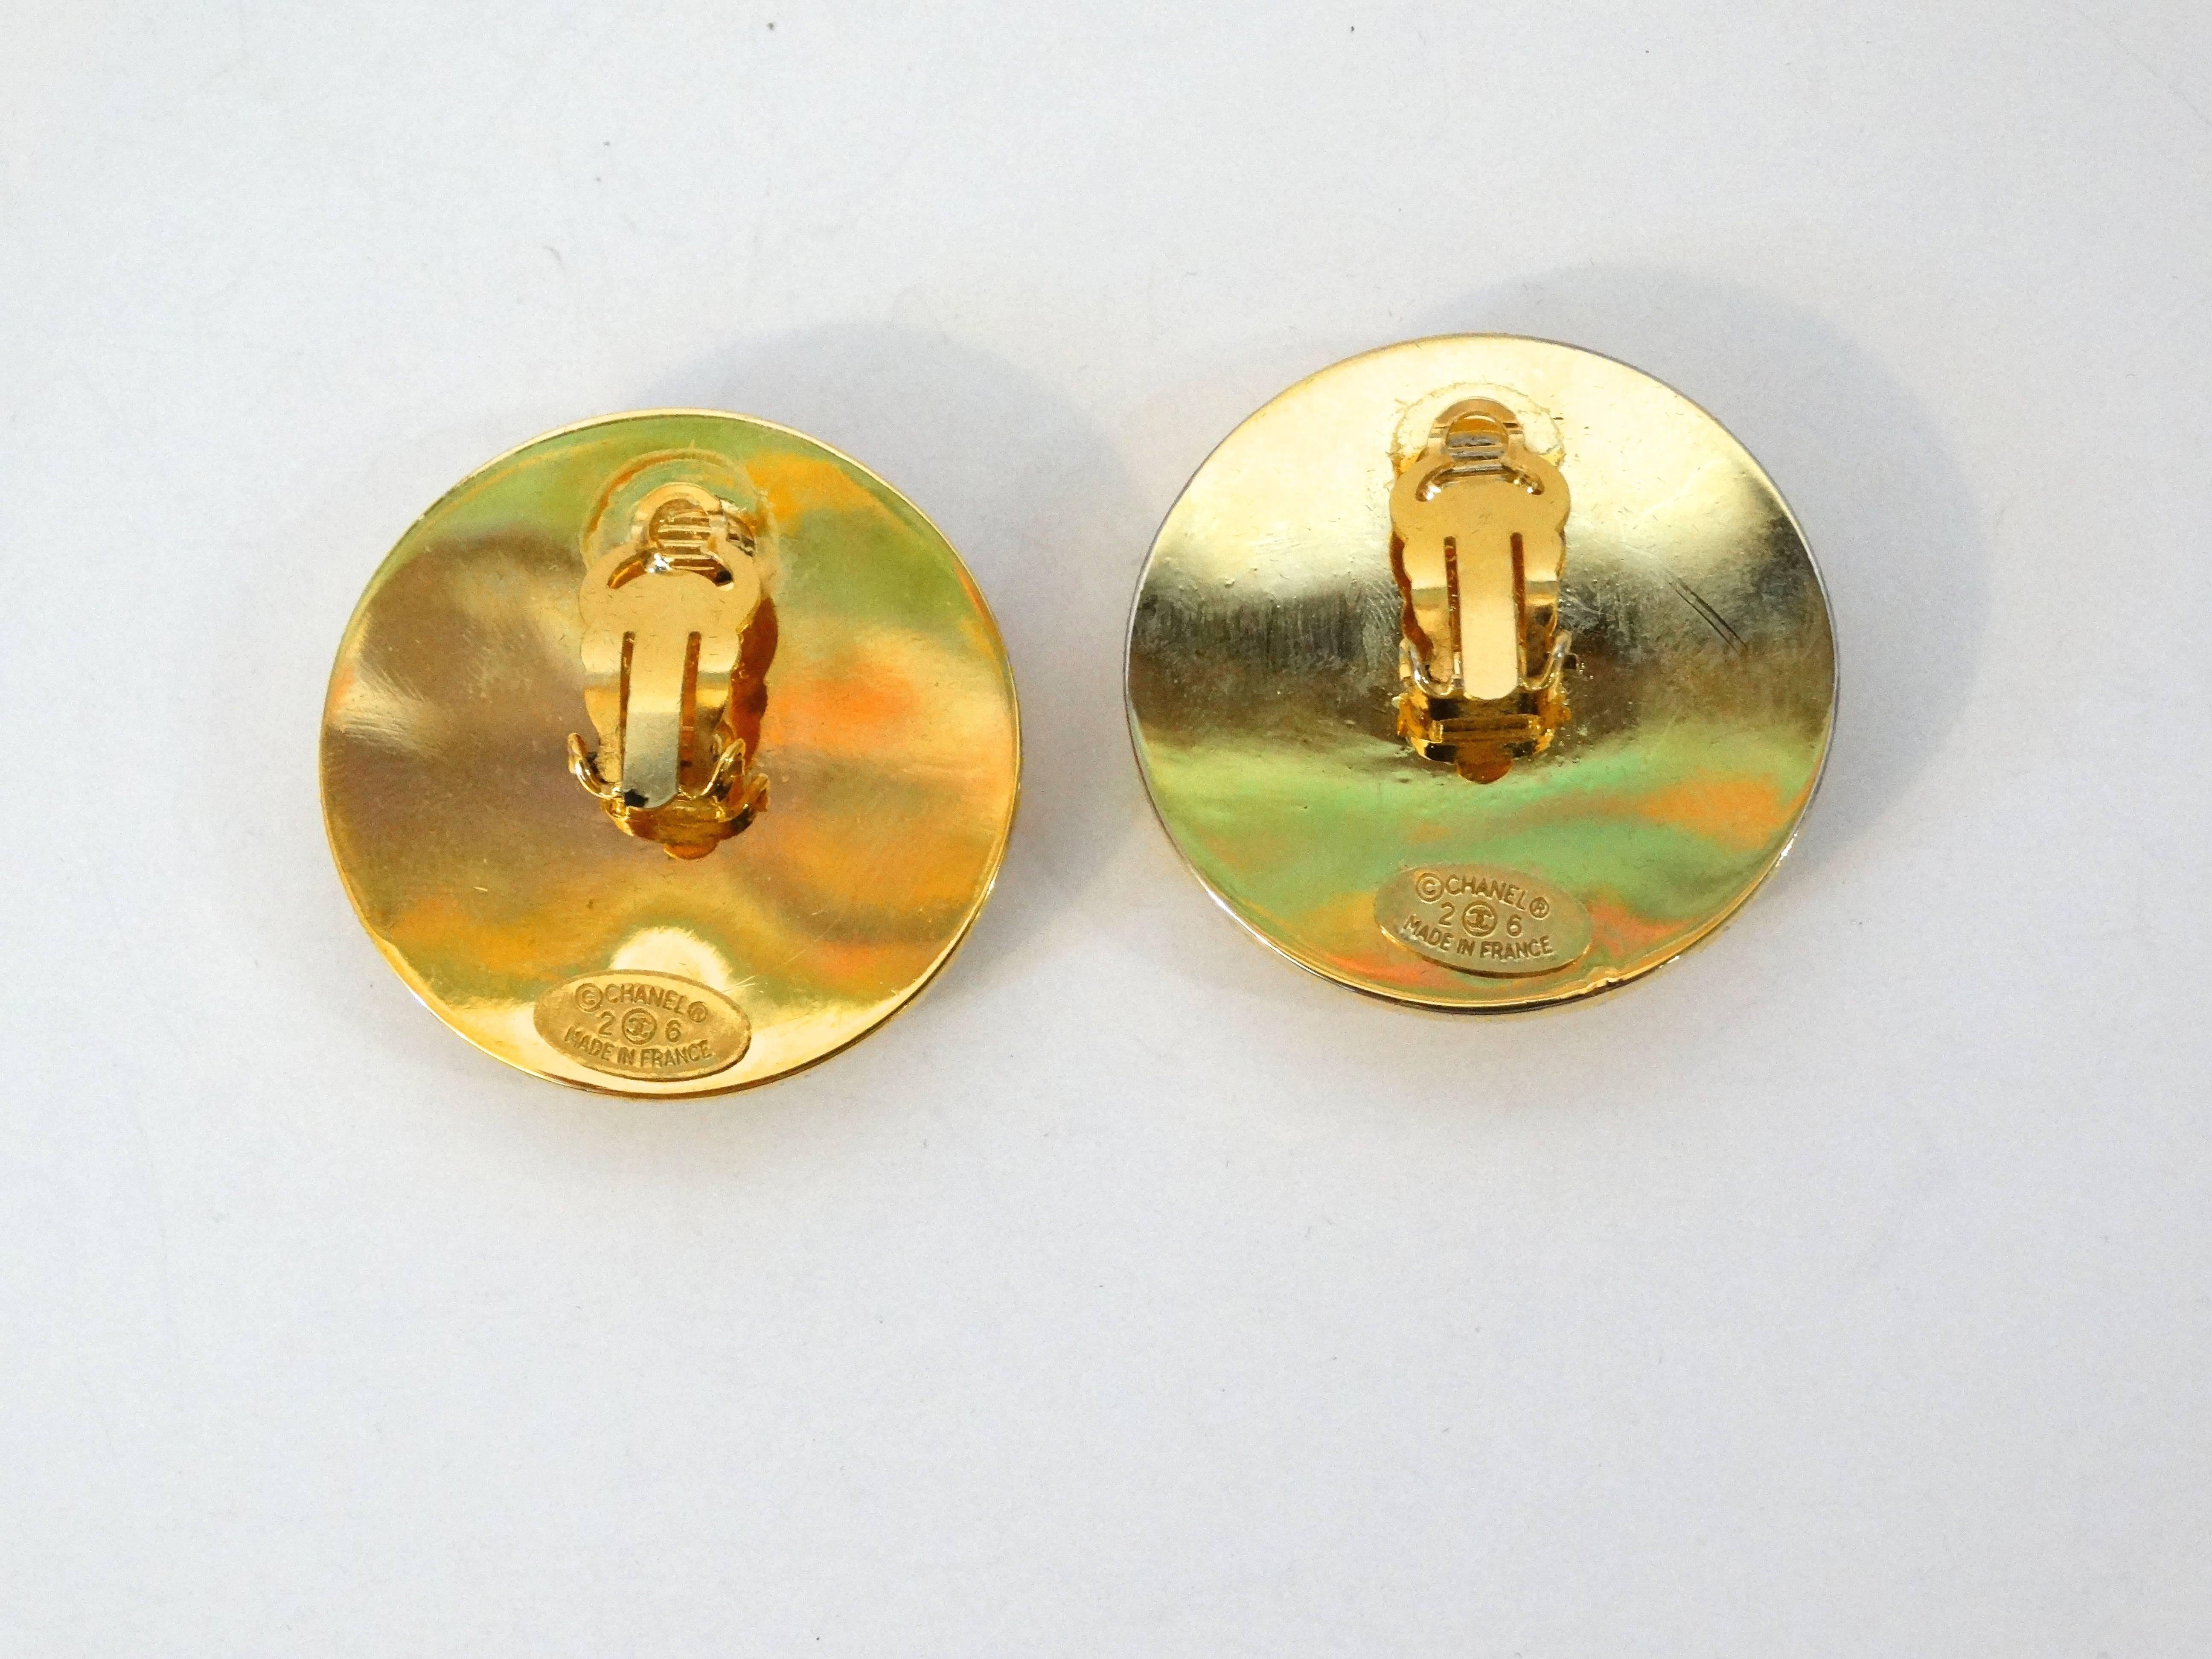 Chanel clip earrings from the 1980s. A classic and timeless look, these earrings have two layers of gold ( one textured and one solid) with the gold CC logo over a matte black. In excellent vintage condition, signed on back Chanel 28 Made in France